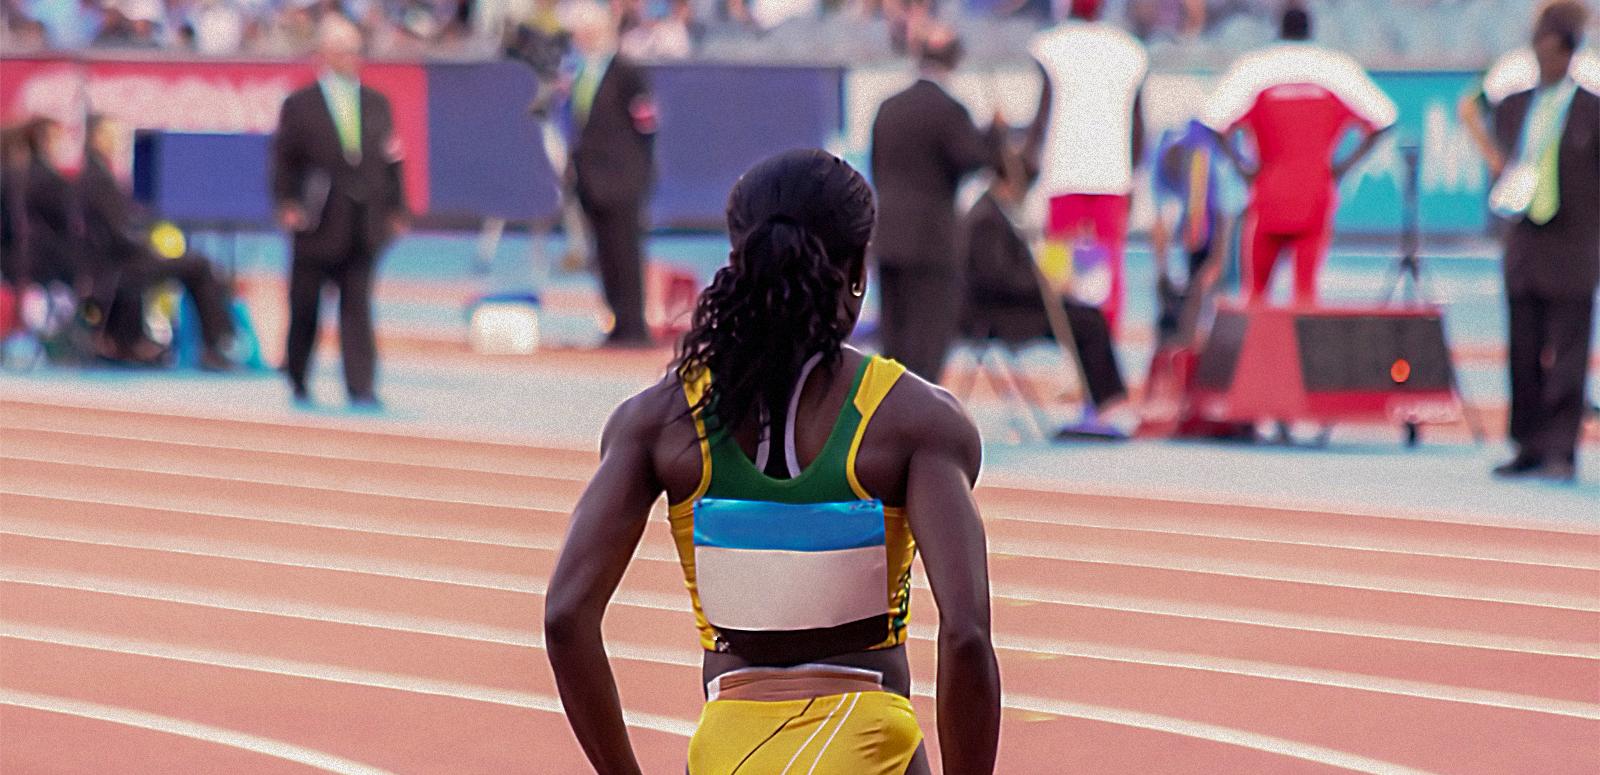 Back view of a female athlete standing on the running track.